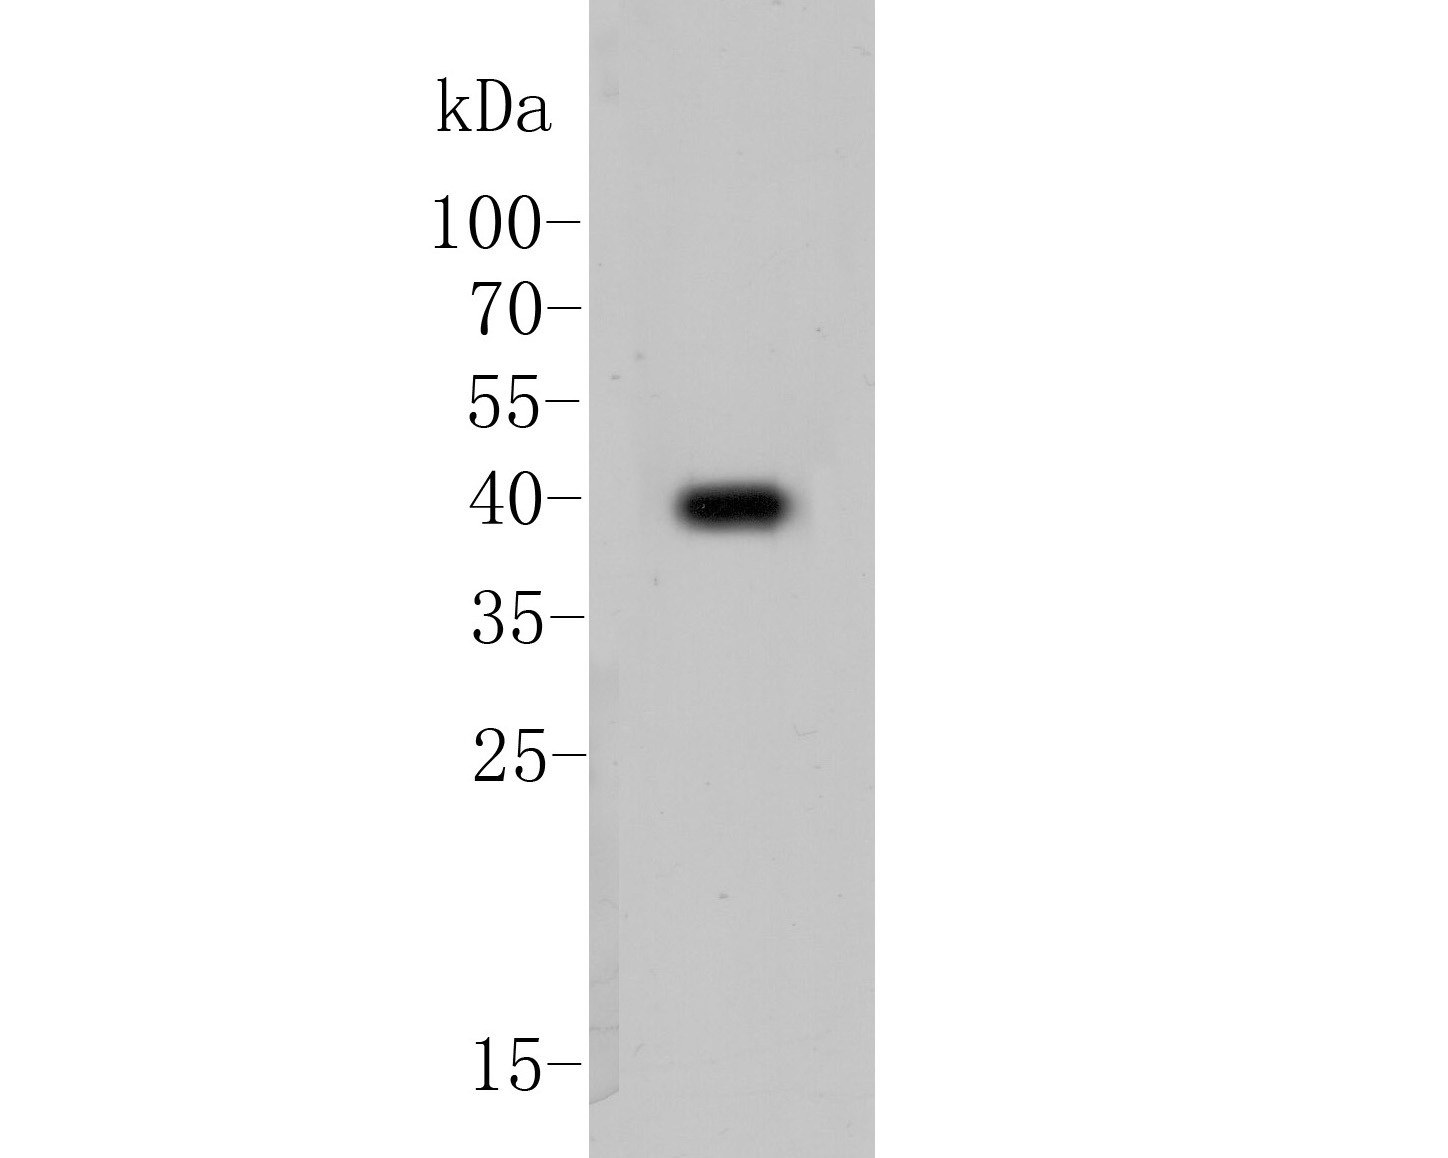 Western blot analysis of Cytokeratin 19 on MCF-7 cell lysate. Proteins were transferred to a PVDF membrane and blocked with 5% BSA in PBS for 1 hour at room temperature. The primary antibody (EM1901-76, 1/5000) was used in 5% BSA at room temperature for 2 hours. Goat Anti-Mouse IgG - HRP Secondary Antibody (HA1006) at 1:5,000 dilution was used for 1 hour at room temperature.